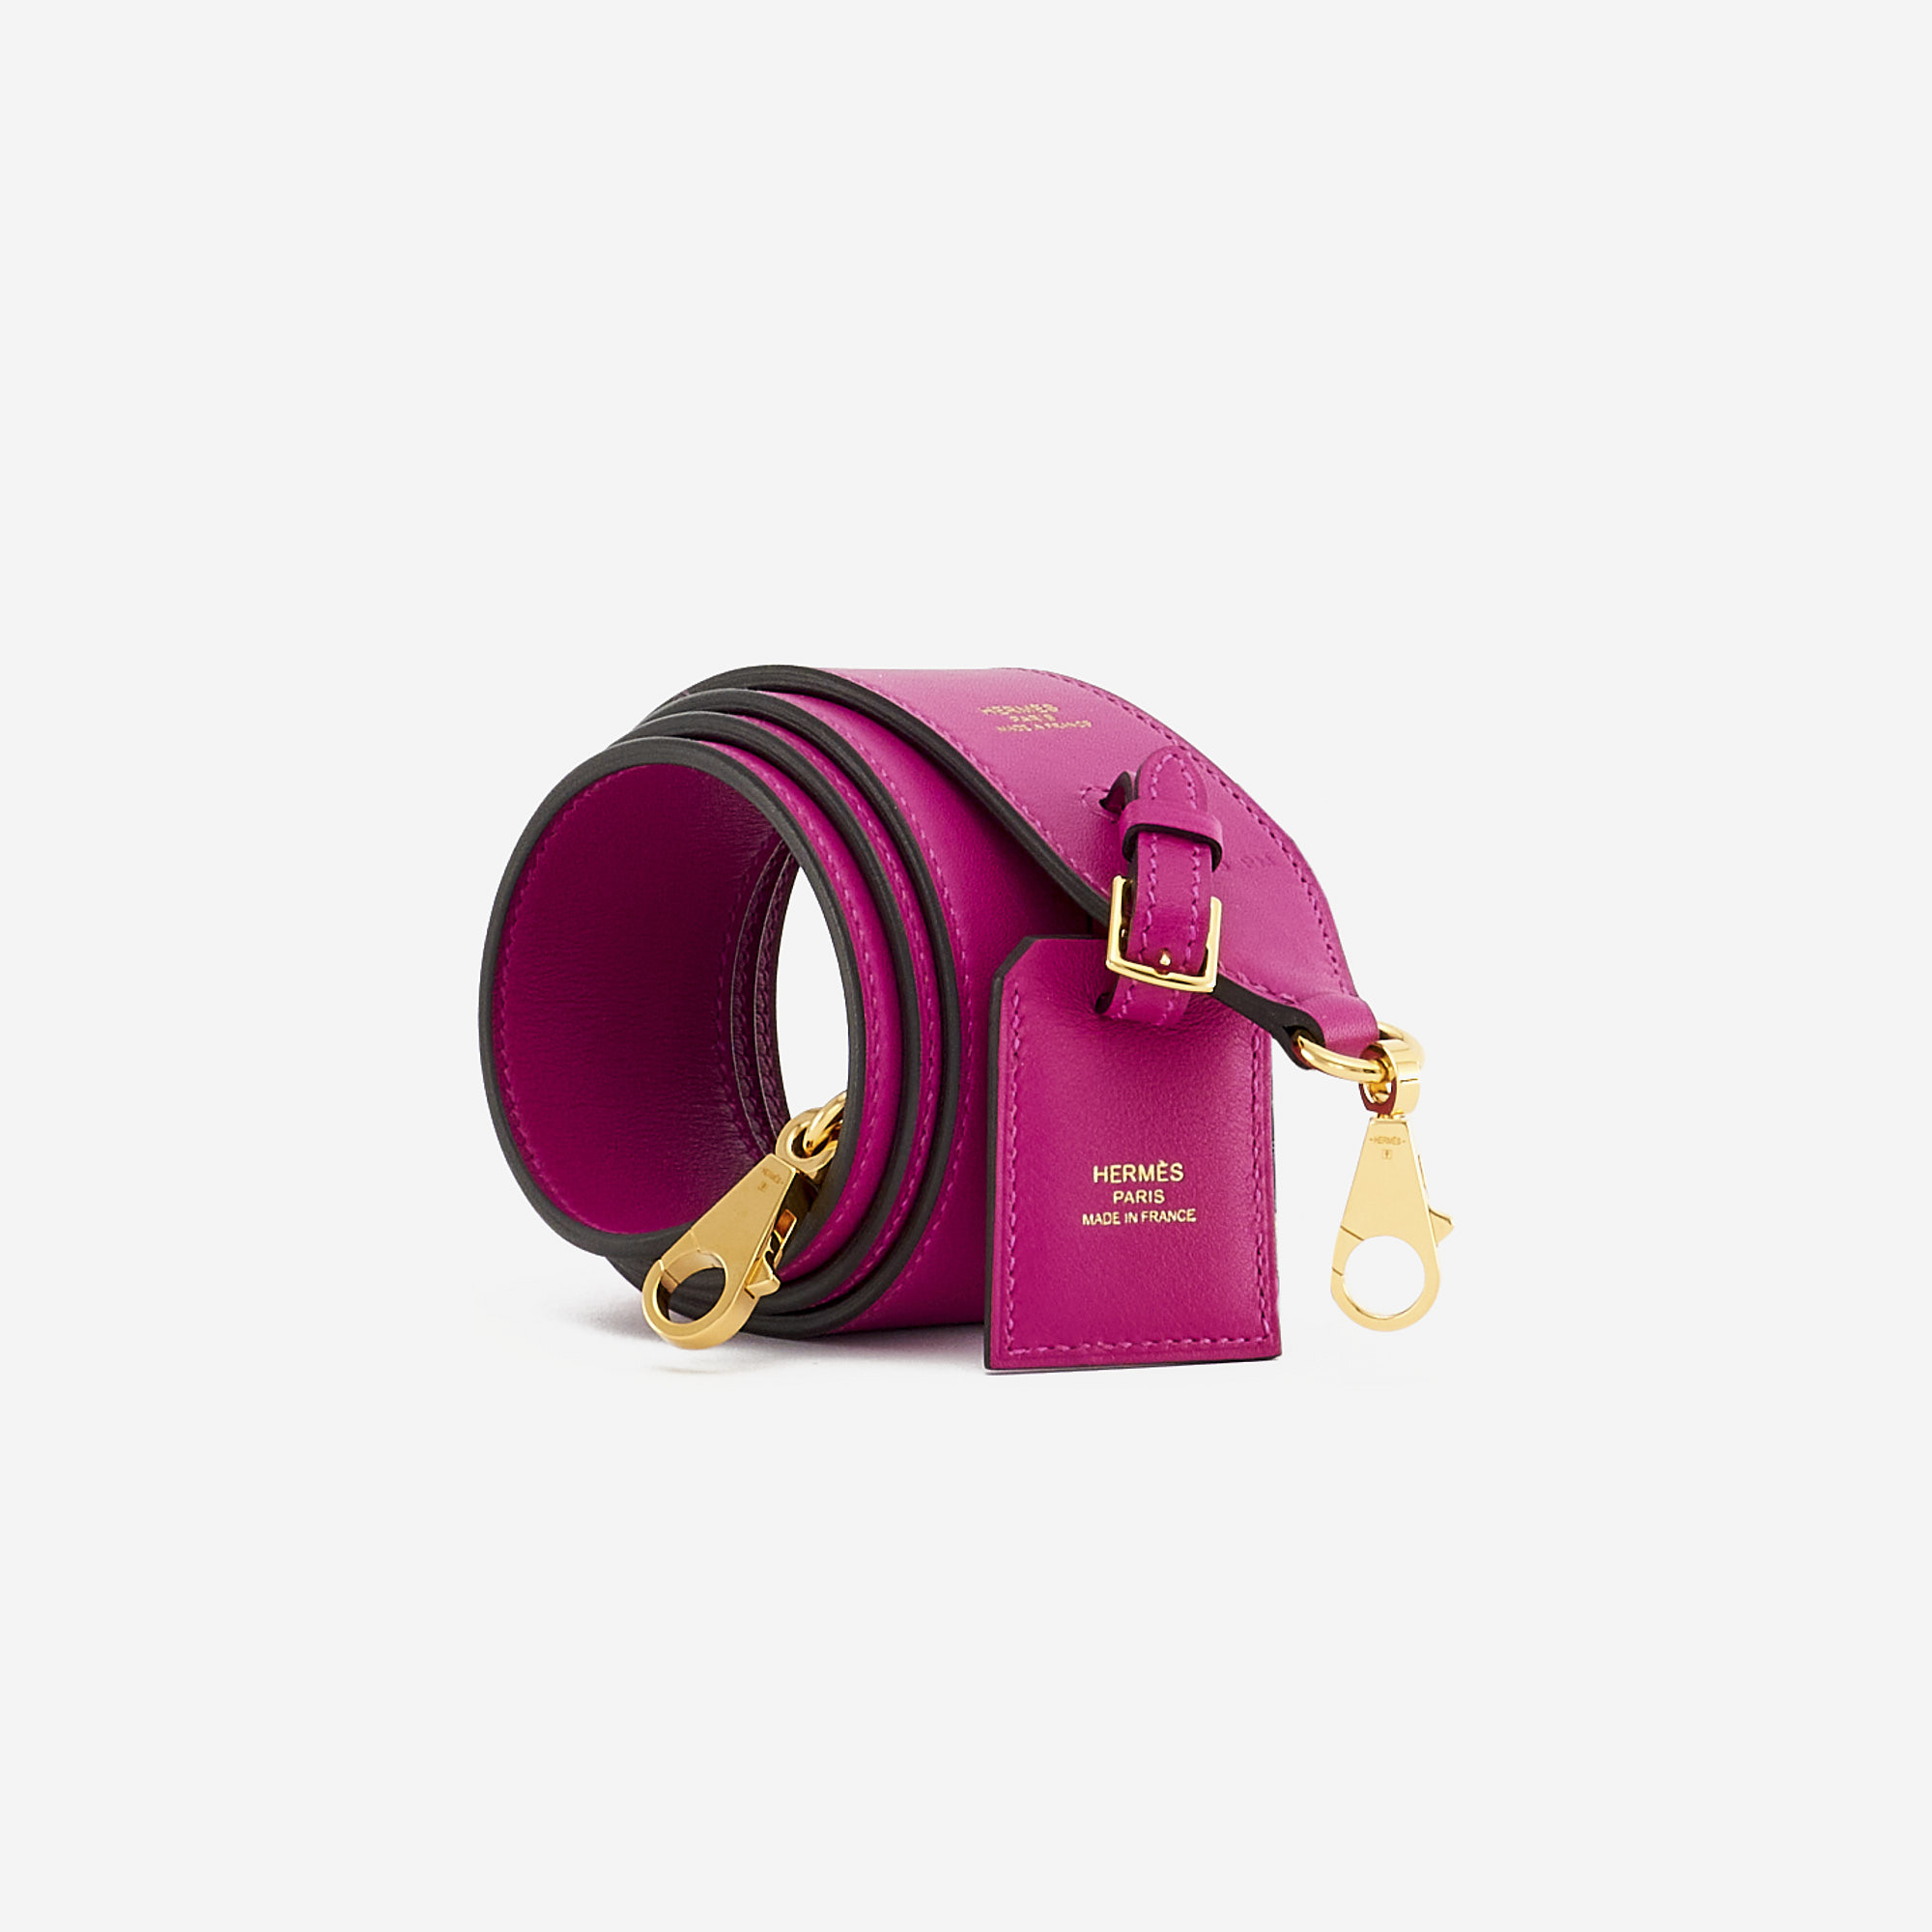 A ROSE POURPRE SWIFT LEATHER CLOCHETTE SHOULDER STRAP WITH GOLD HARDWARE,  HERMÈS, 2017